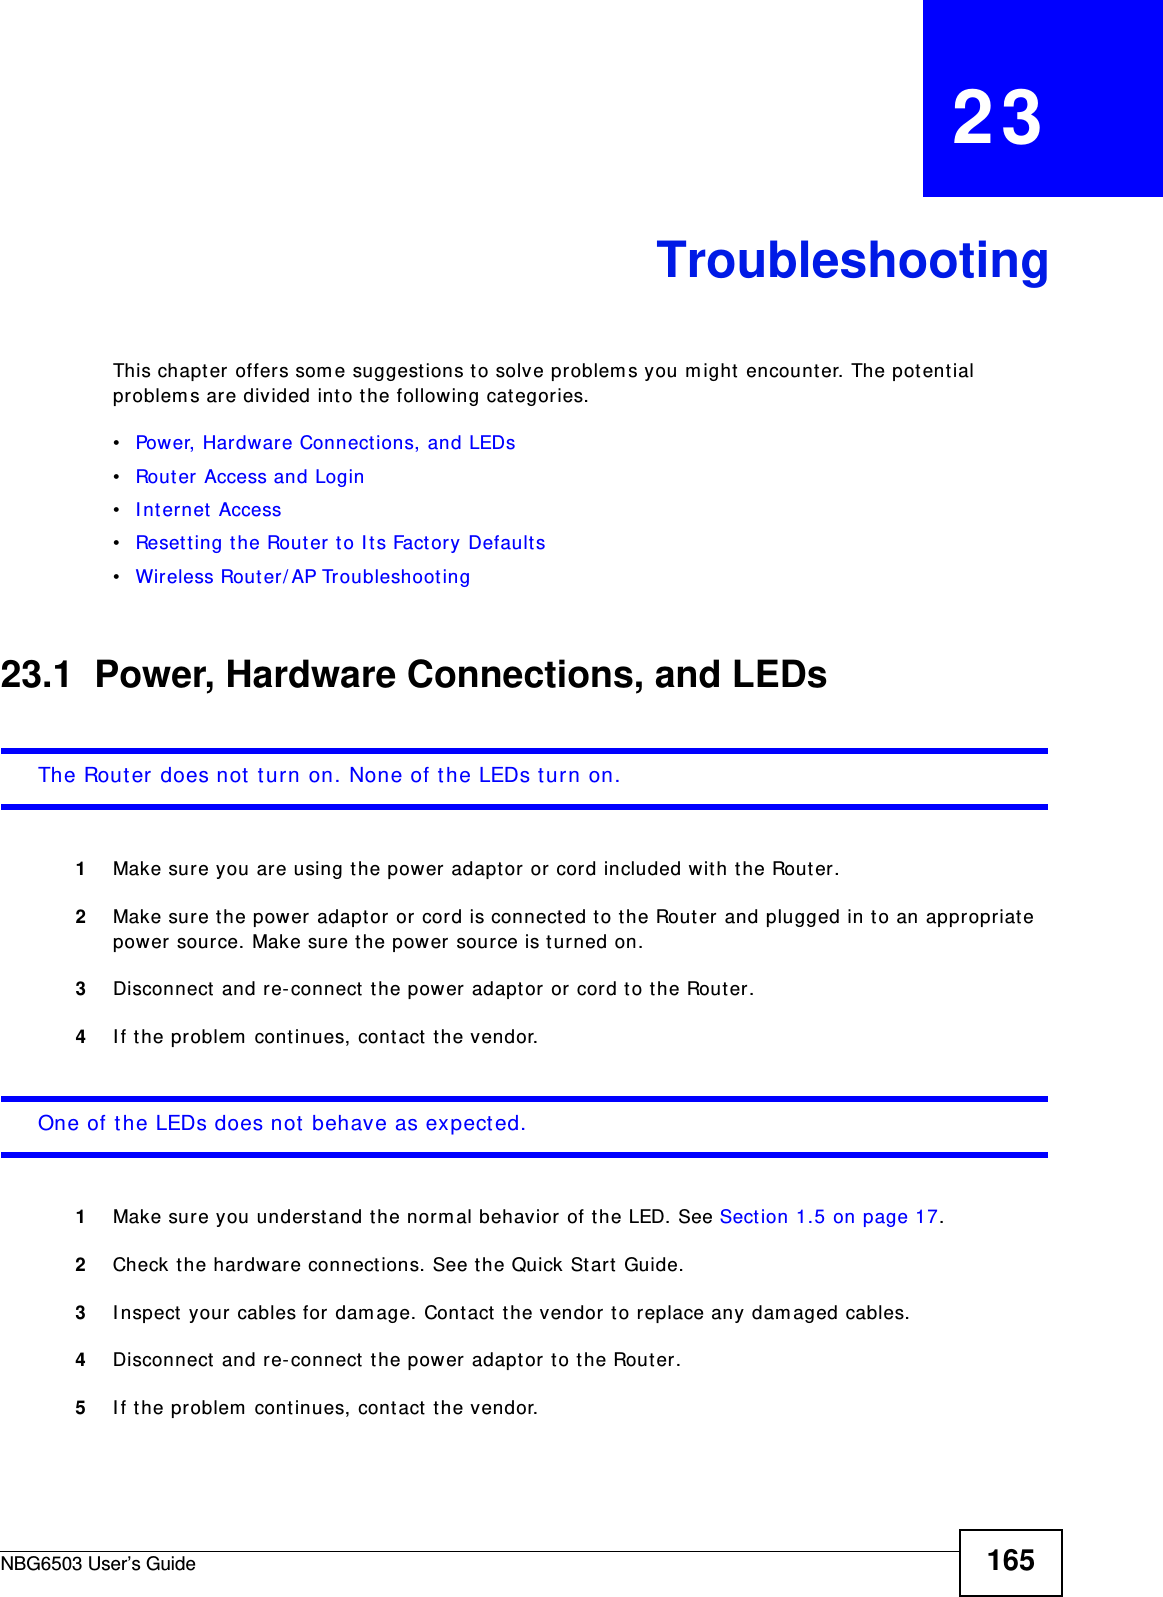 NBG6503 User’s Guide 165CHAPTER   23TroubleshootingThis chapter offers some suggestions to solve problems you might encounter. The potential problems are divided into the following categories. •Power, Hardware Connections, and LEDs•Router Access and Login•Internet Access•Resetting the Router to Its Factory Defaults•Wireless Router/AP Troubleshooting23.1  Power, Hardware Connections, and LEDsThe Router does not turn on. None of the LEDs turn on.1Make sure you are using the power adaptor or cord included with the Router.2Make sure the power adaptor or cord is connected to the Router and plugged in to an appropriate power source. Make sure the power source is turned on.3Disconnect and re-connect the power adaptor or cord to the Router.4If the problem continues, contact the vendor.One of the LEDs does not behave as expected.1Make sure you understand the normal behavior of the LED. See Section 1.5 on page 17.2Check the hardware connections. See the Quick Start Guide. 3Inspect your cables for damage. Contact the vendor to replace any damaged cables.4Disconnect and re-connect the power adaptor to the Router. 5If the problem continues, contact the vendor.